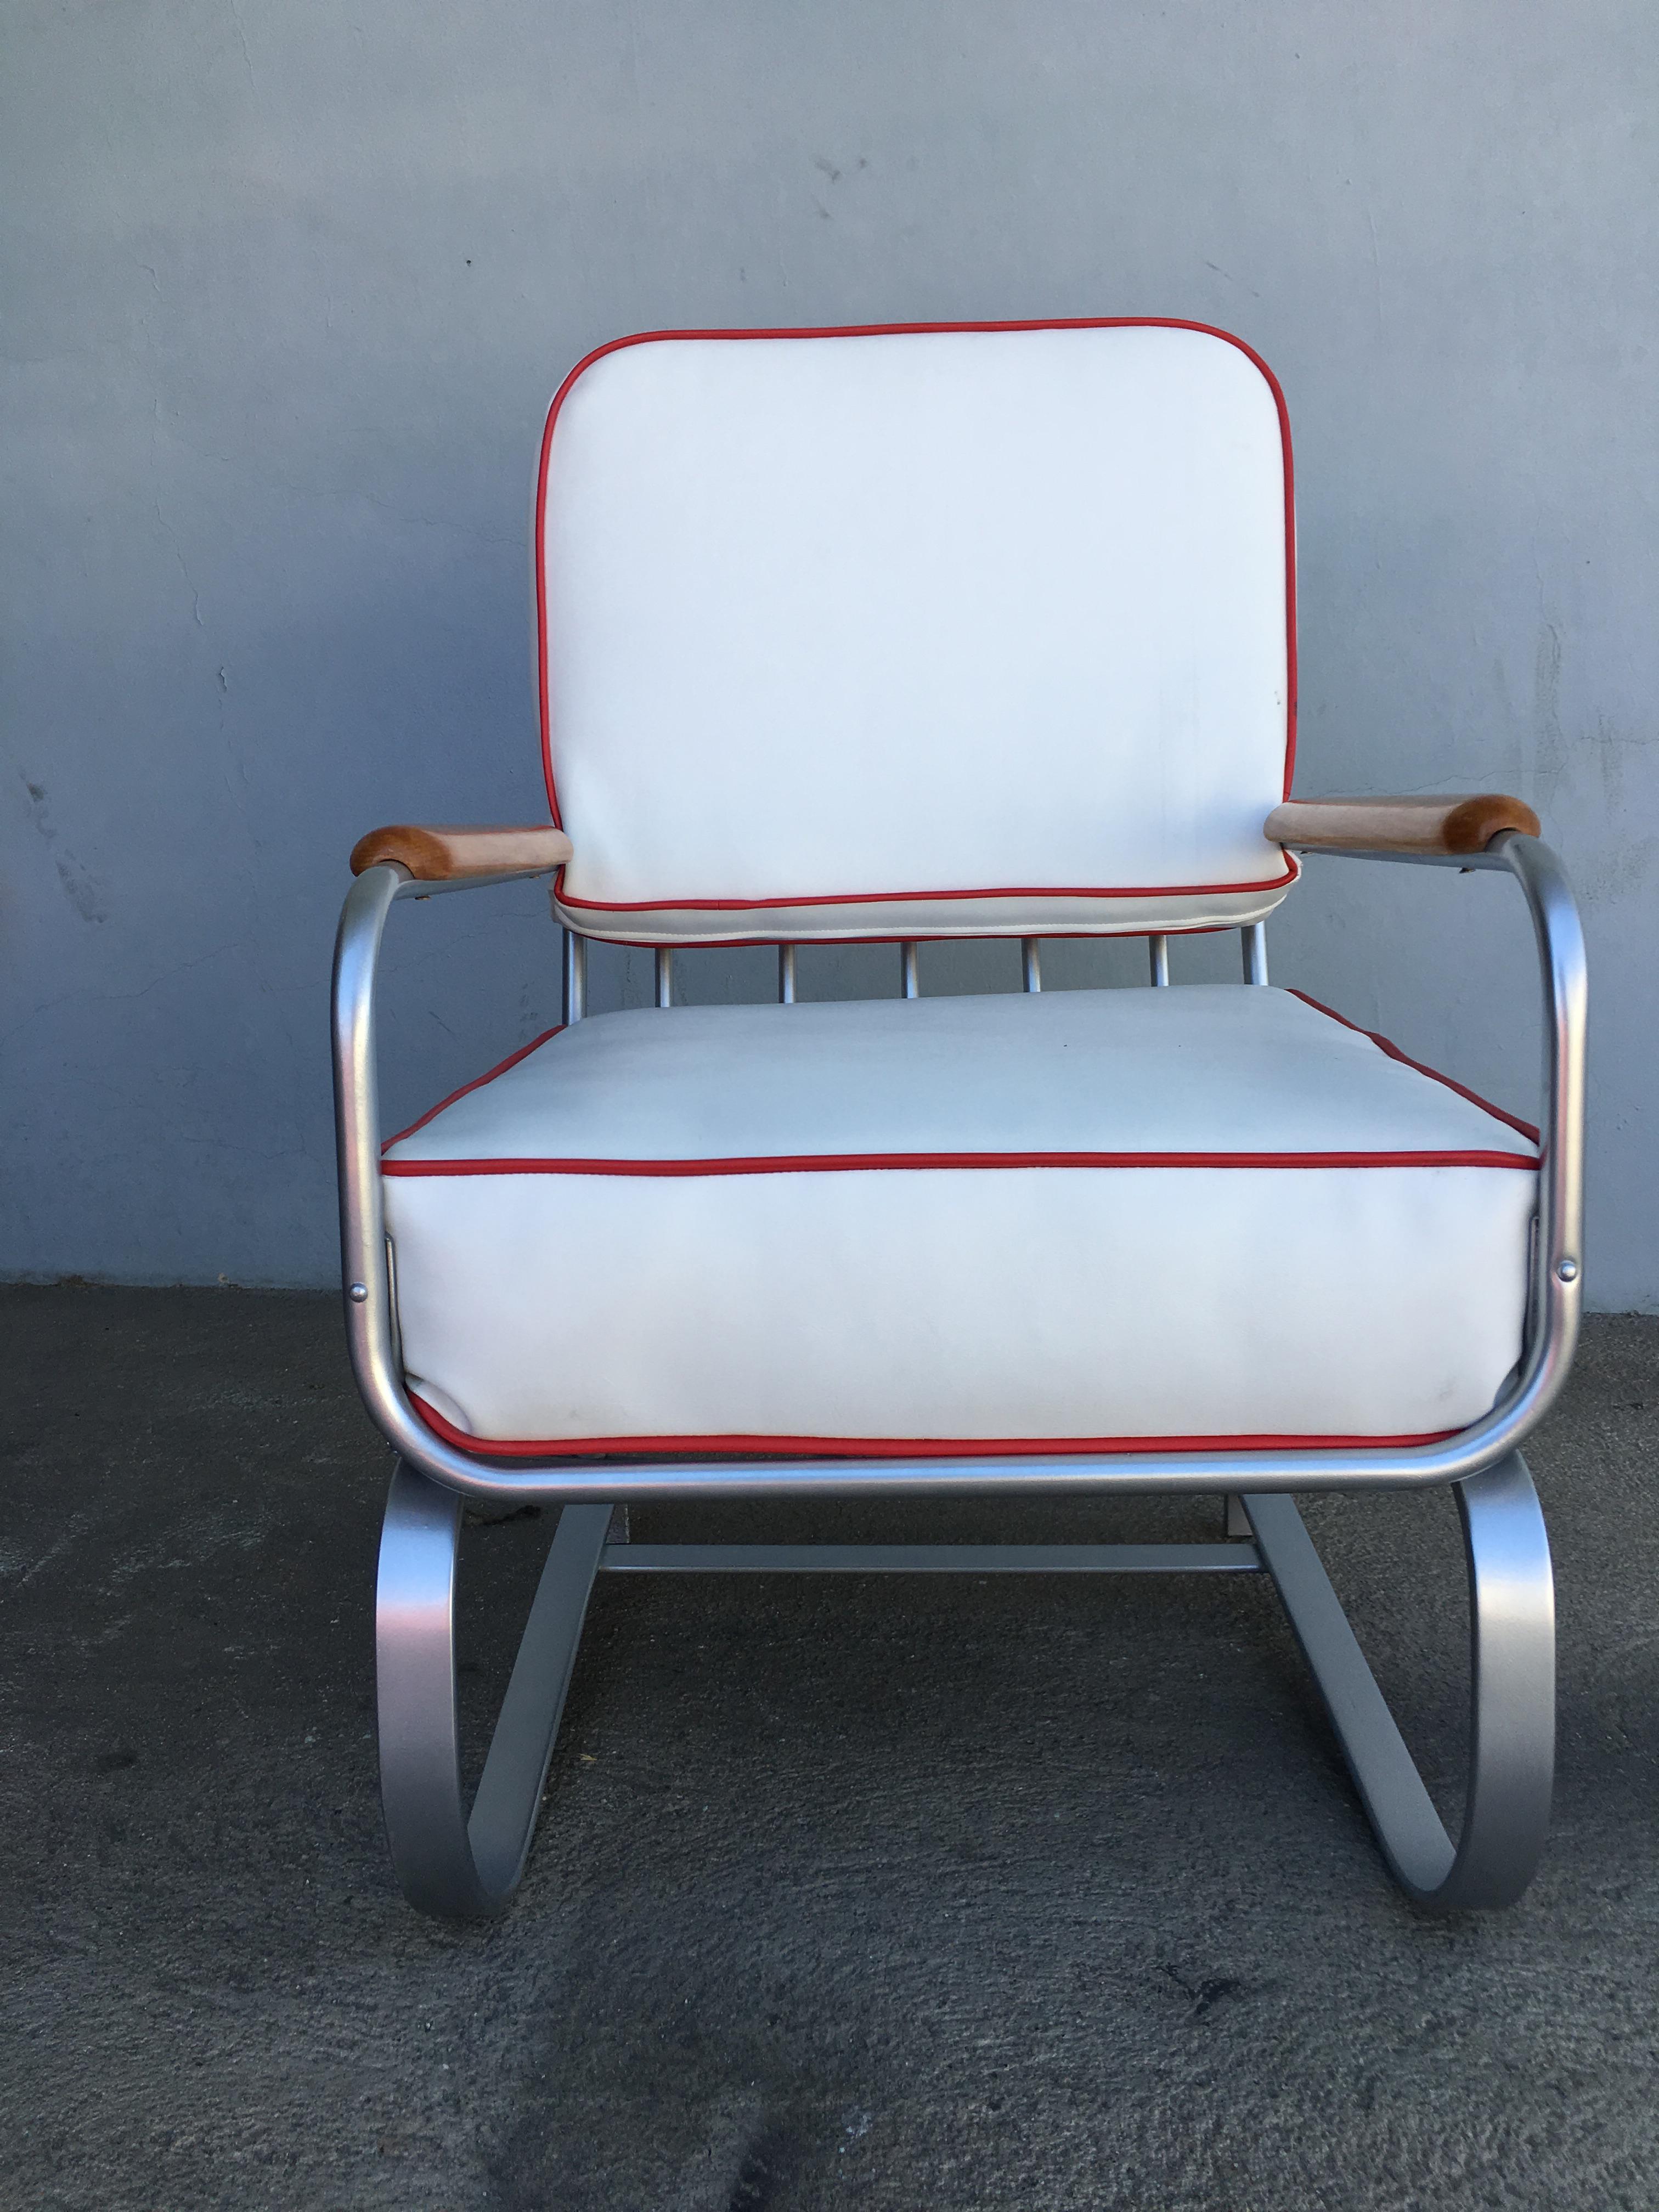 Chrome Art Deco springer lounge chair consisting of chrome frame that seamlessly forms to shape the flat iron legs, arms, and back support of the streamlined seat. The arms are topped with lightly stained walnut that follows the curvature of the